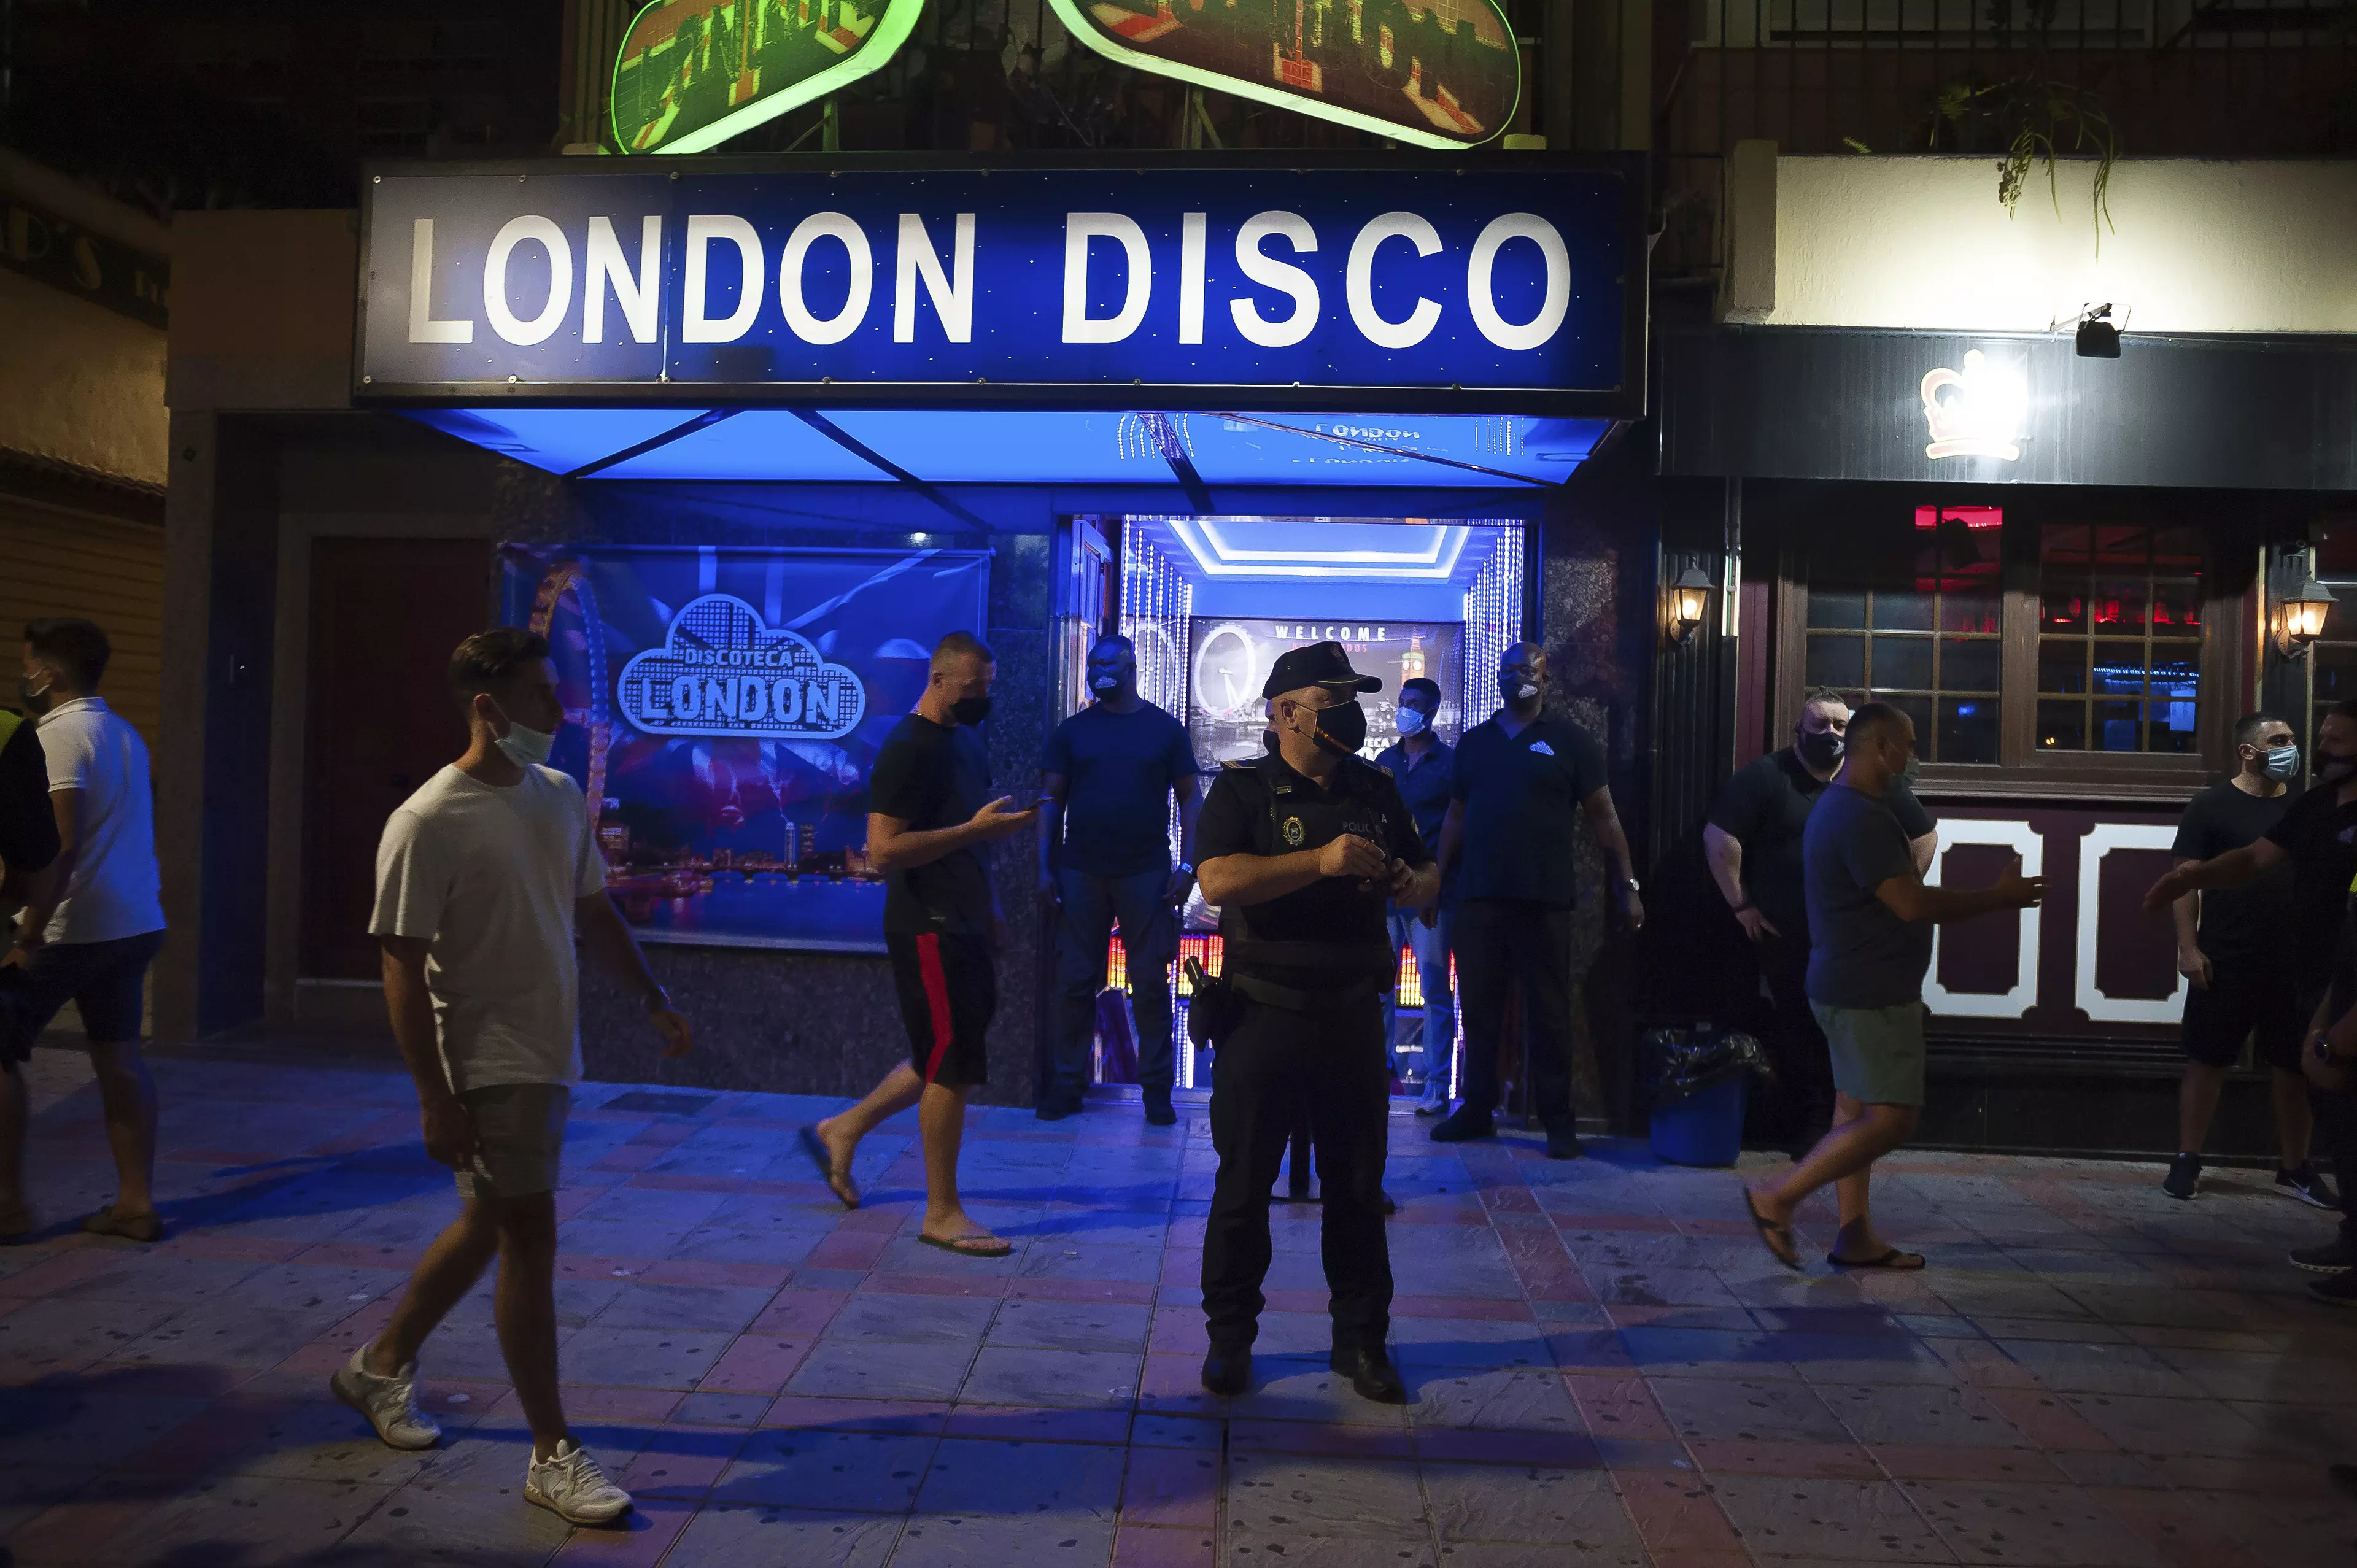 Nightclubs across Spain have been ordered to close.